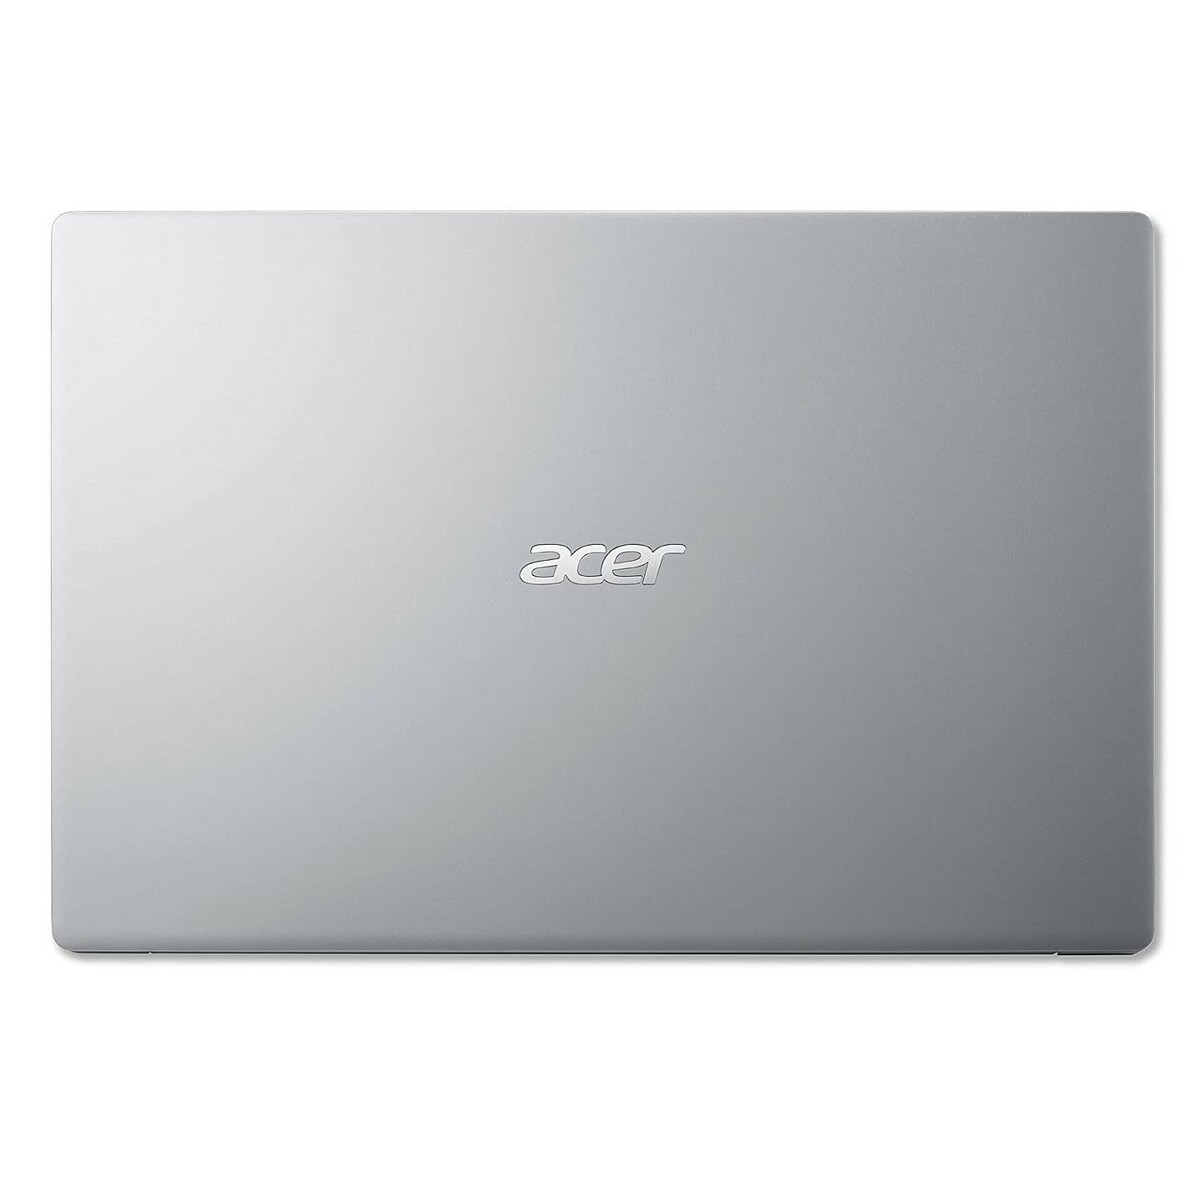 Acer Notebook SF314-43 AMD R5 14" Win10 Silver + MS Office